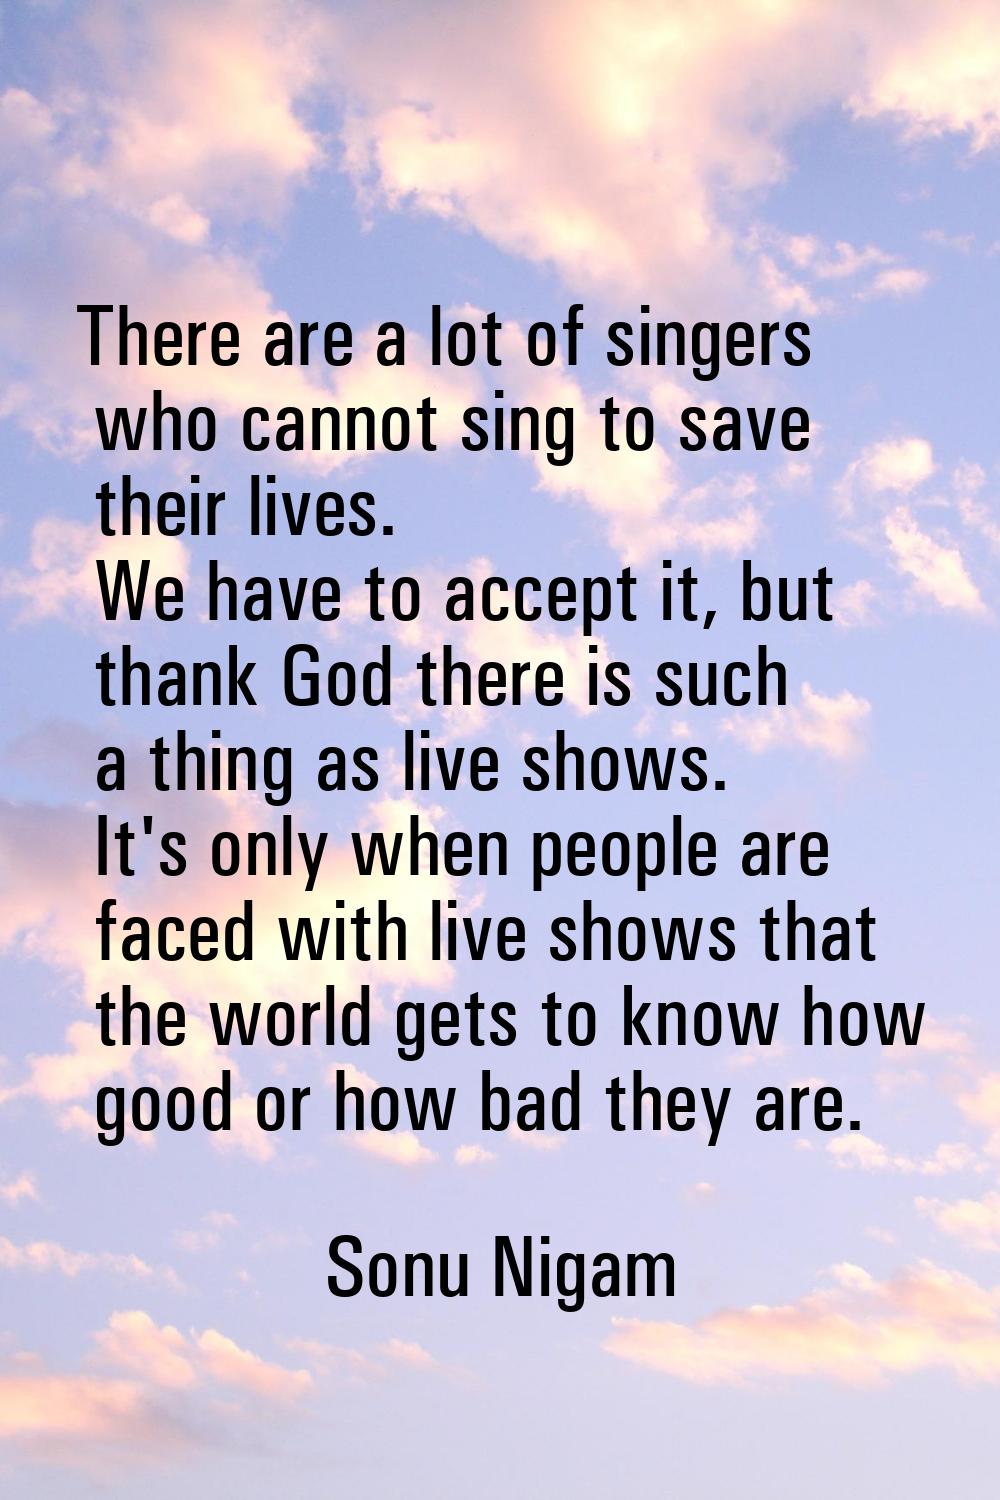 There are a lot of singers who cannot sing to save their lives. We have to accept it, but thank God